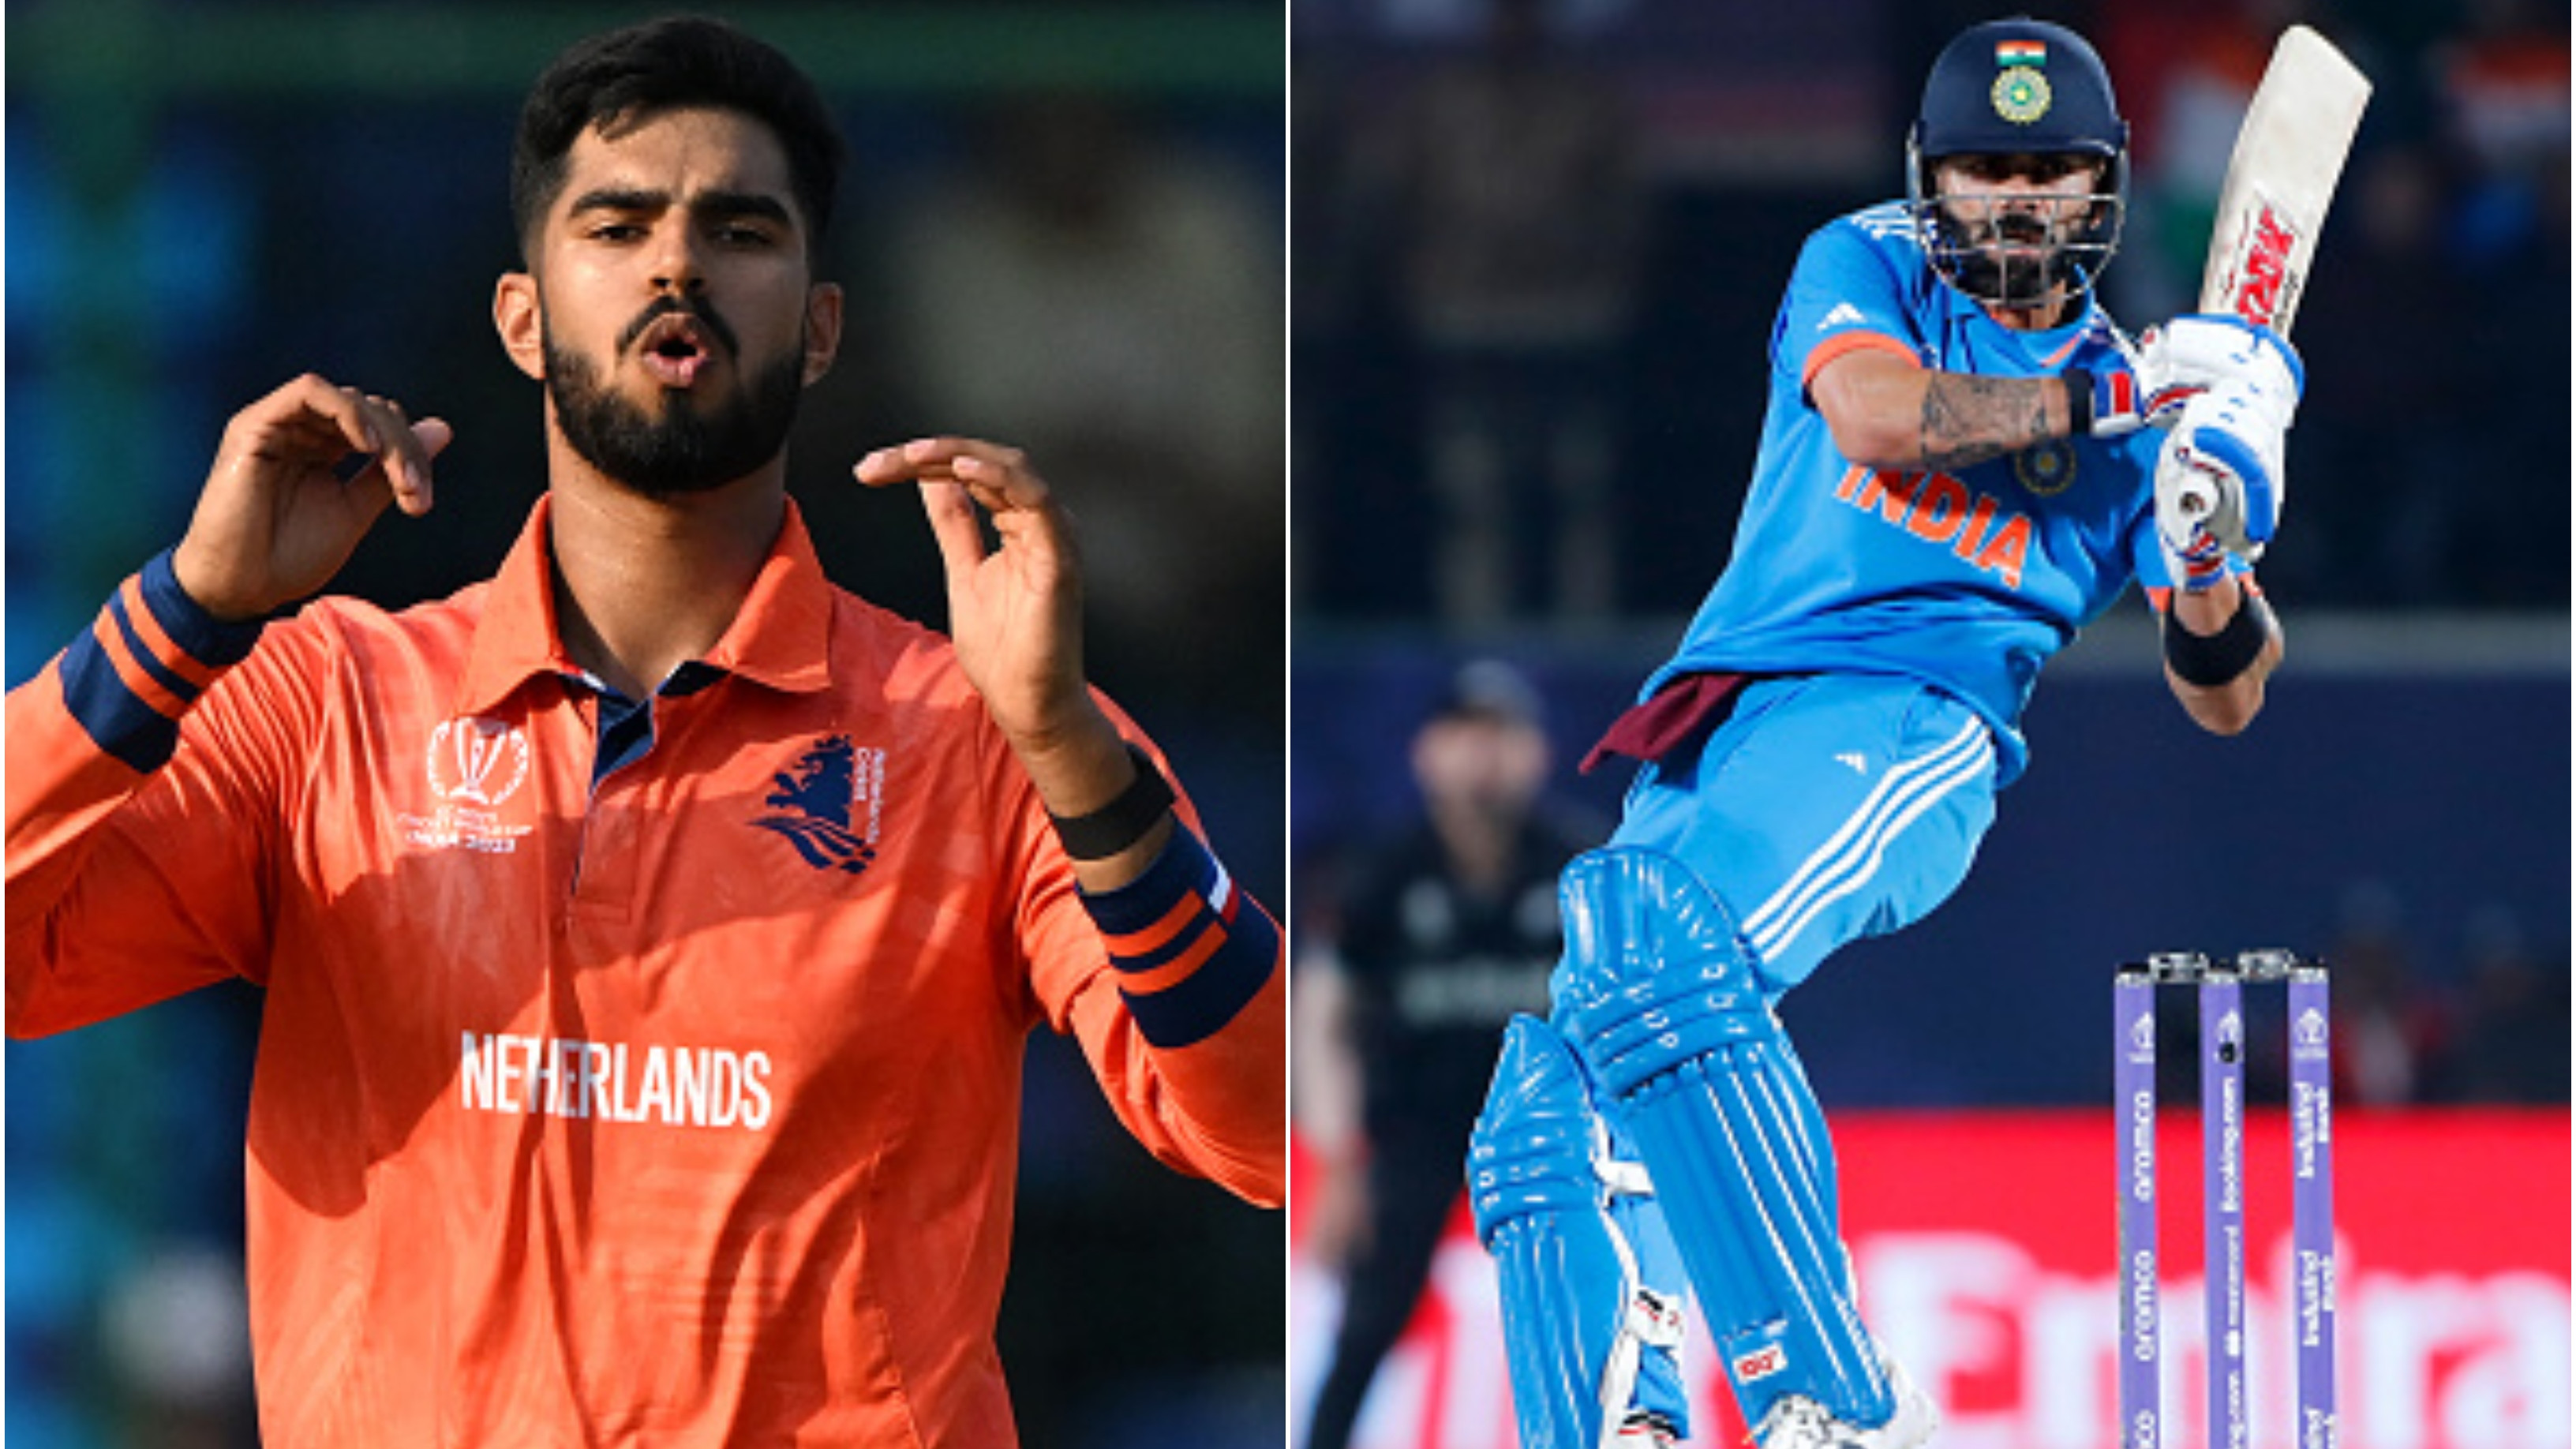 CWC 2023: “I consider that wicket as the best gift,” Dutch spinner Aryan Dutt expresses his wish to dismiss Virat Kohli